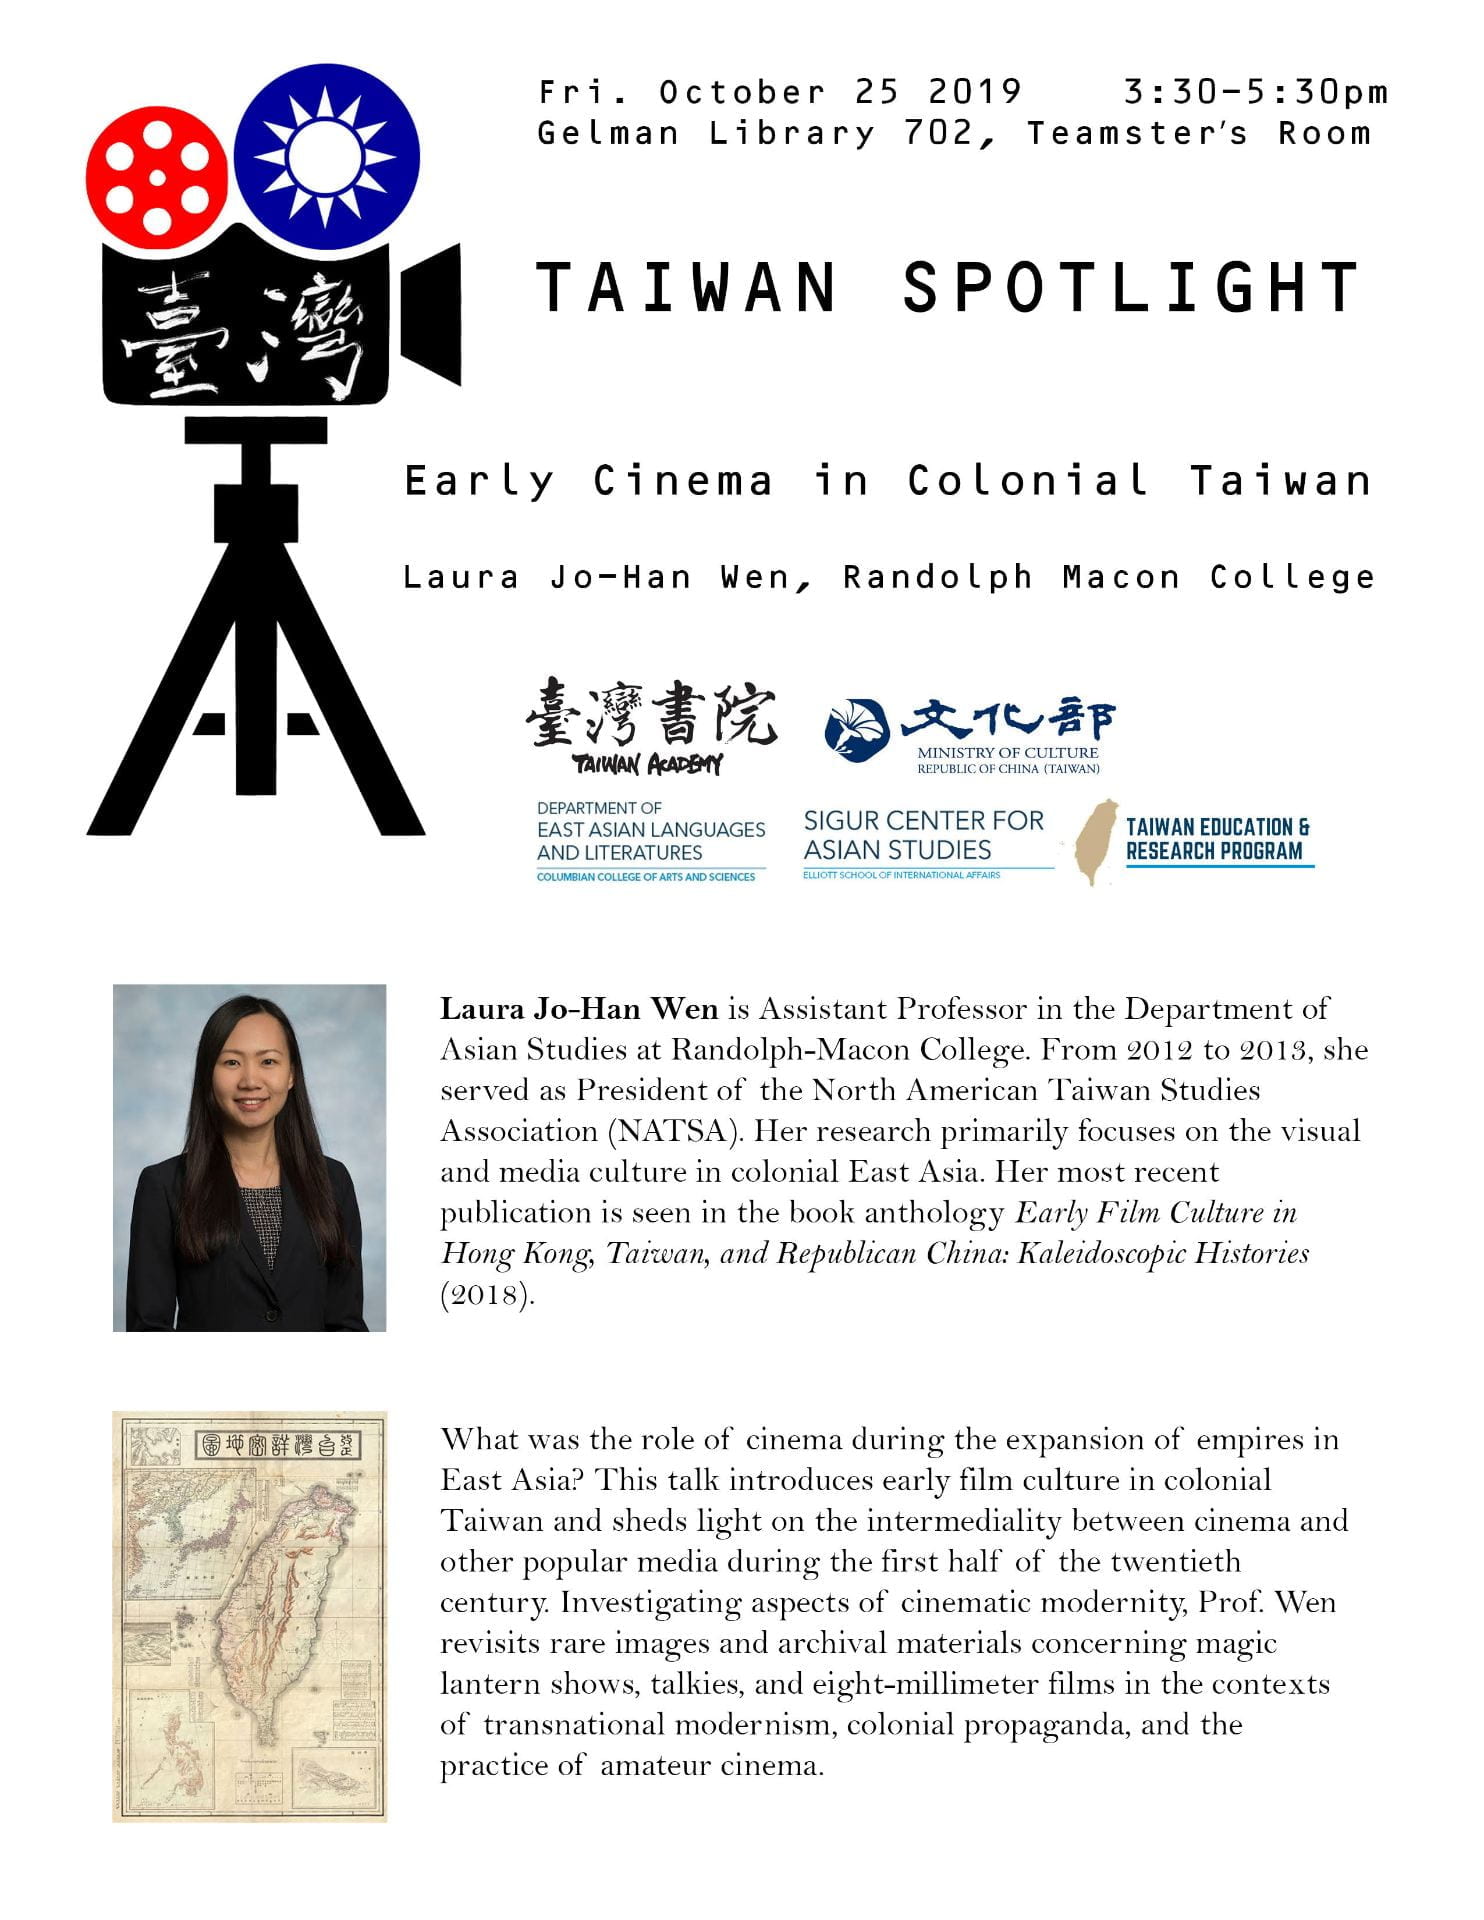 poster for Taiwan Spotlight: Early Cinema in Colonial Taiwan event